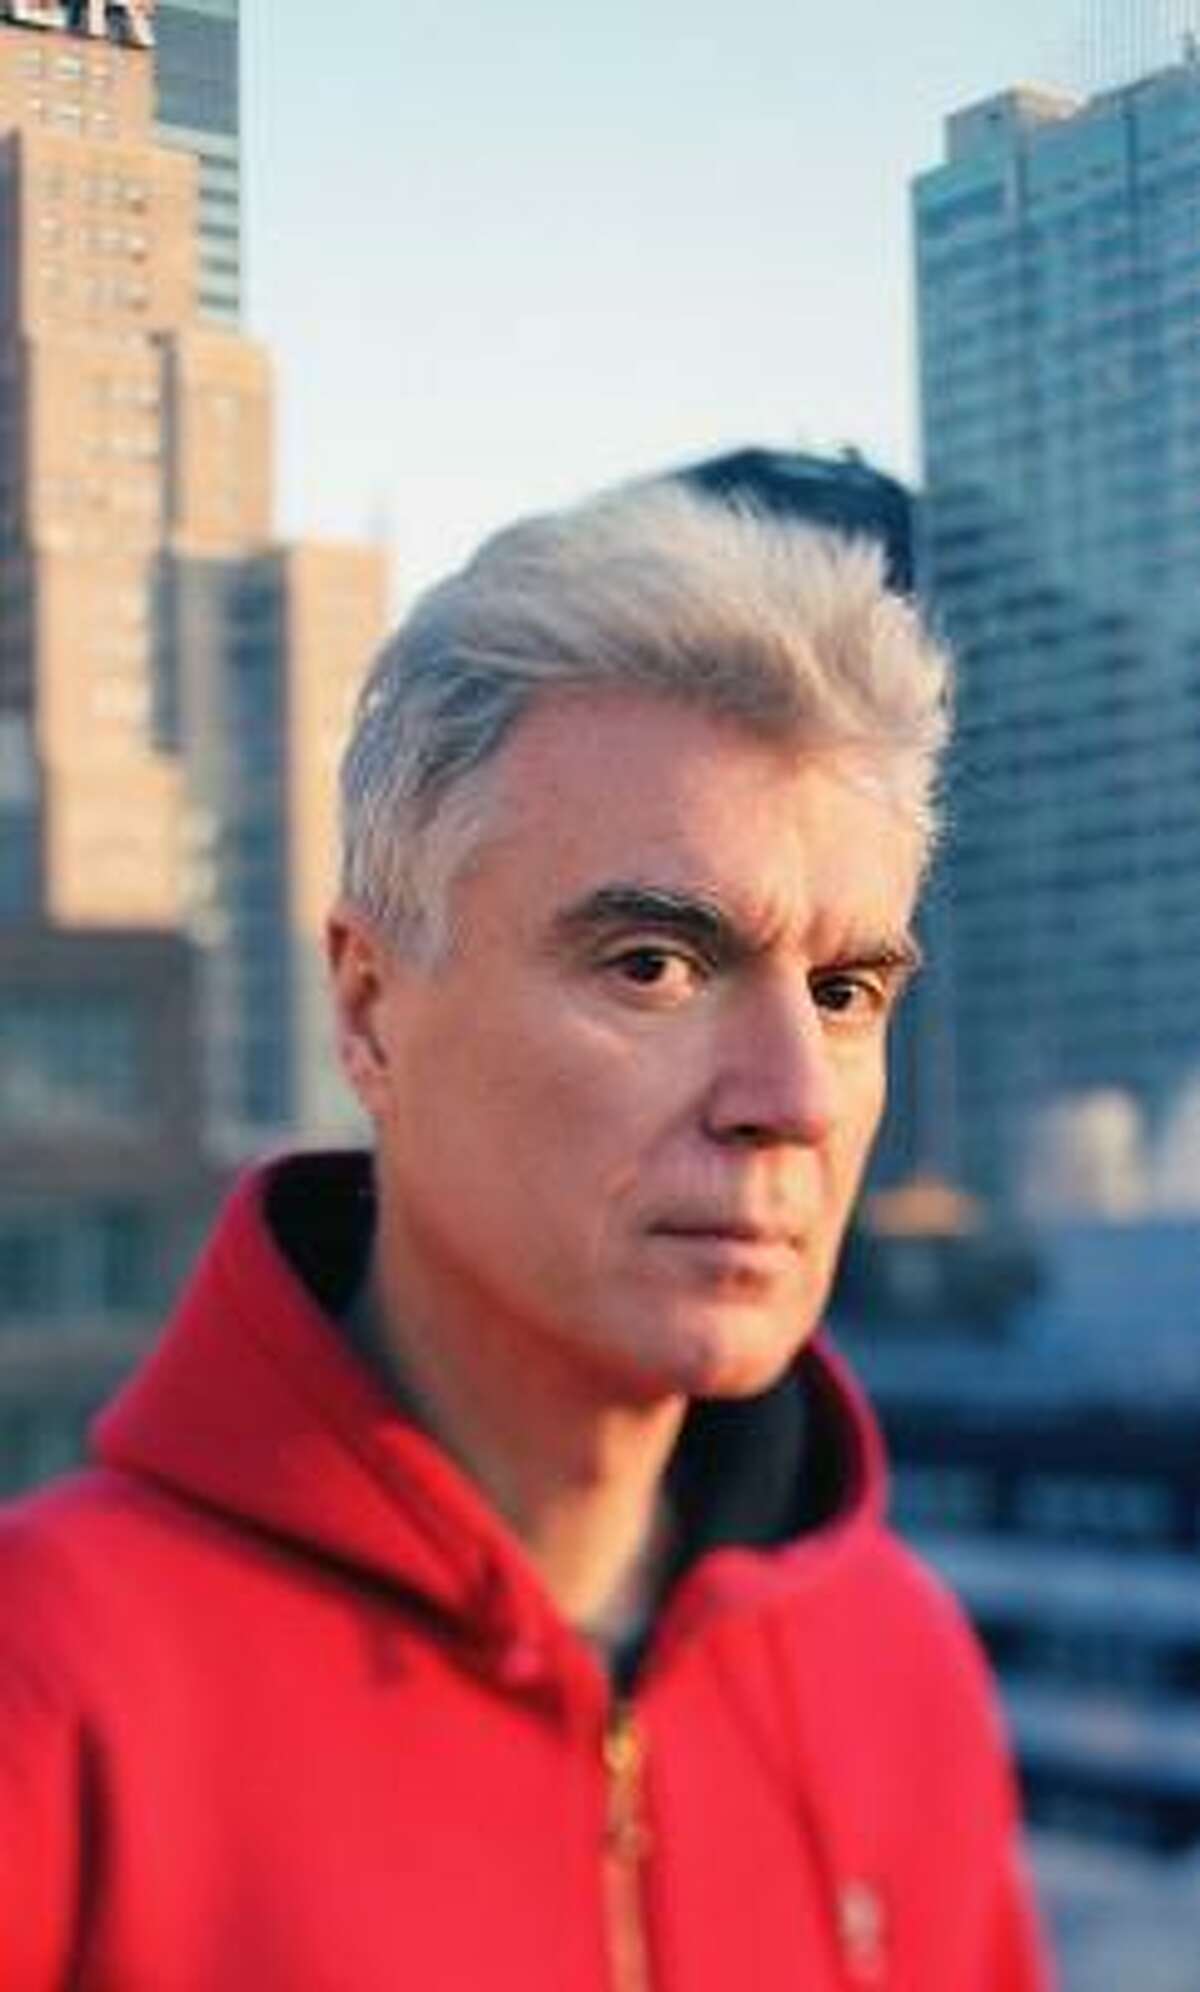 David Byrne, pictured, and Brian Eno collaborated on a new album, Everything That Happens Will Happen Today.